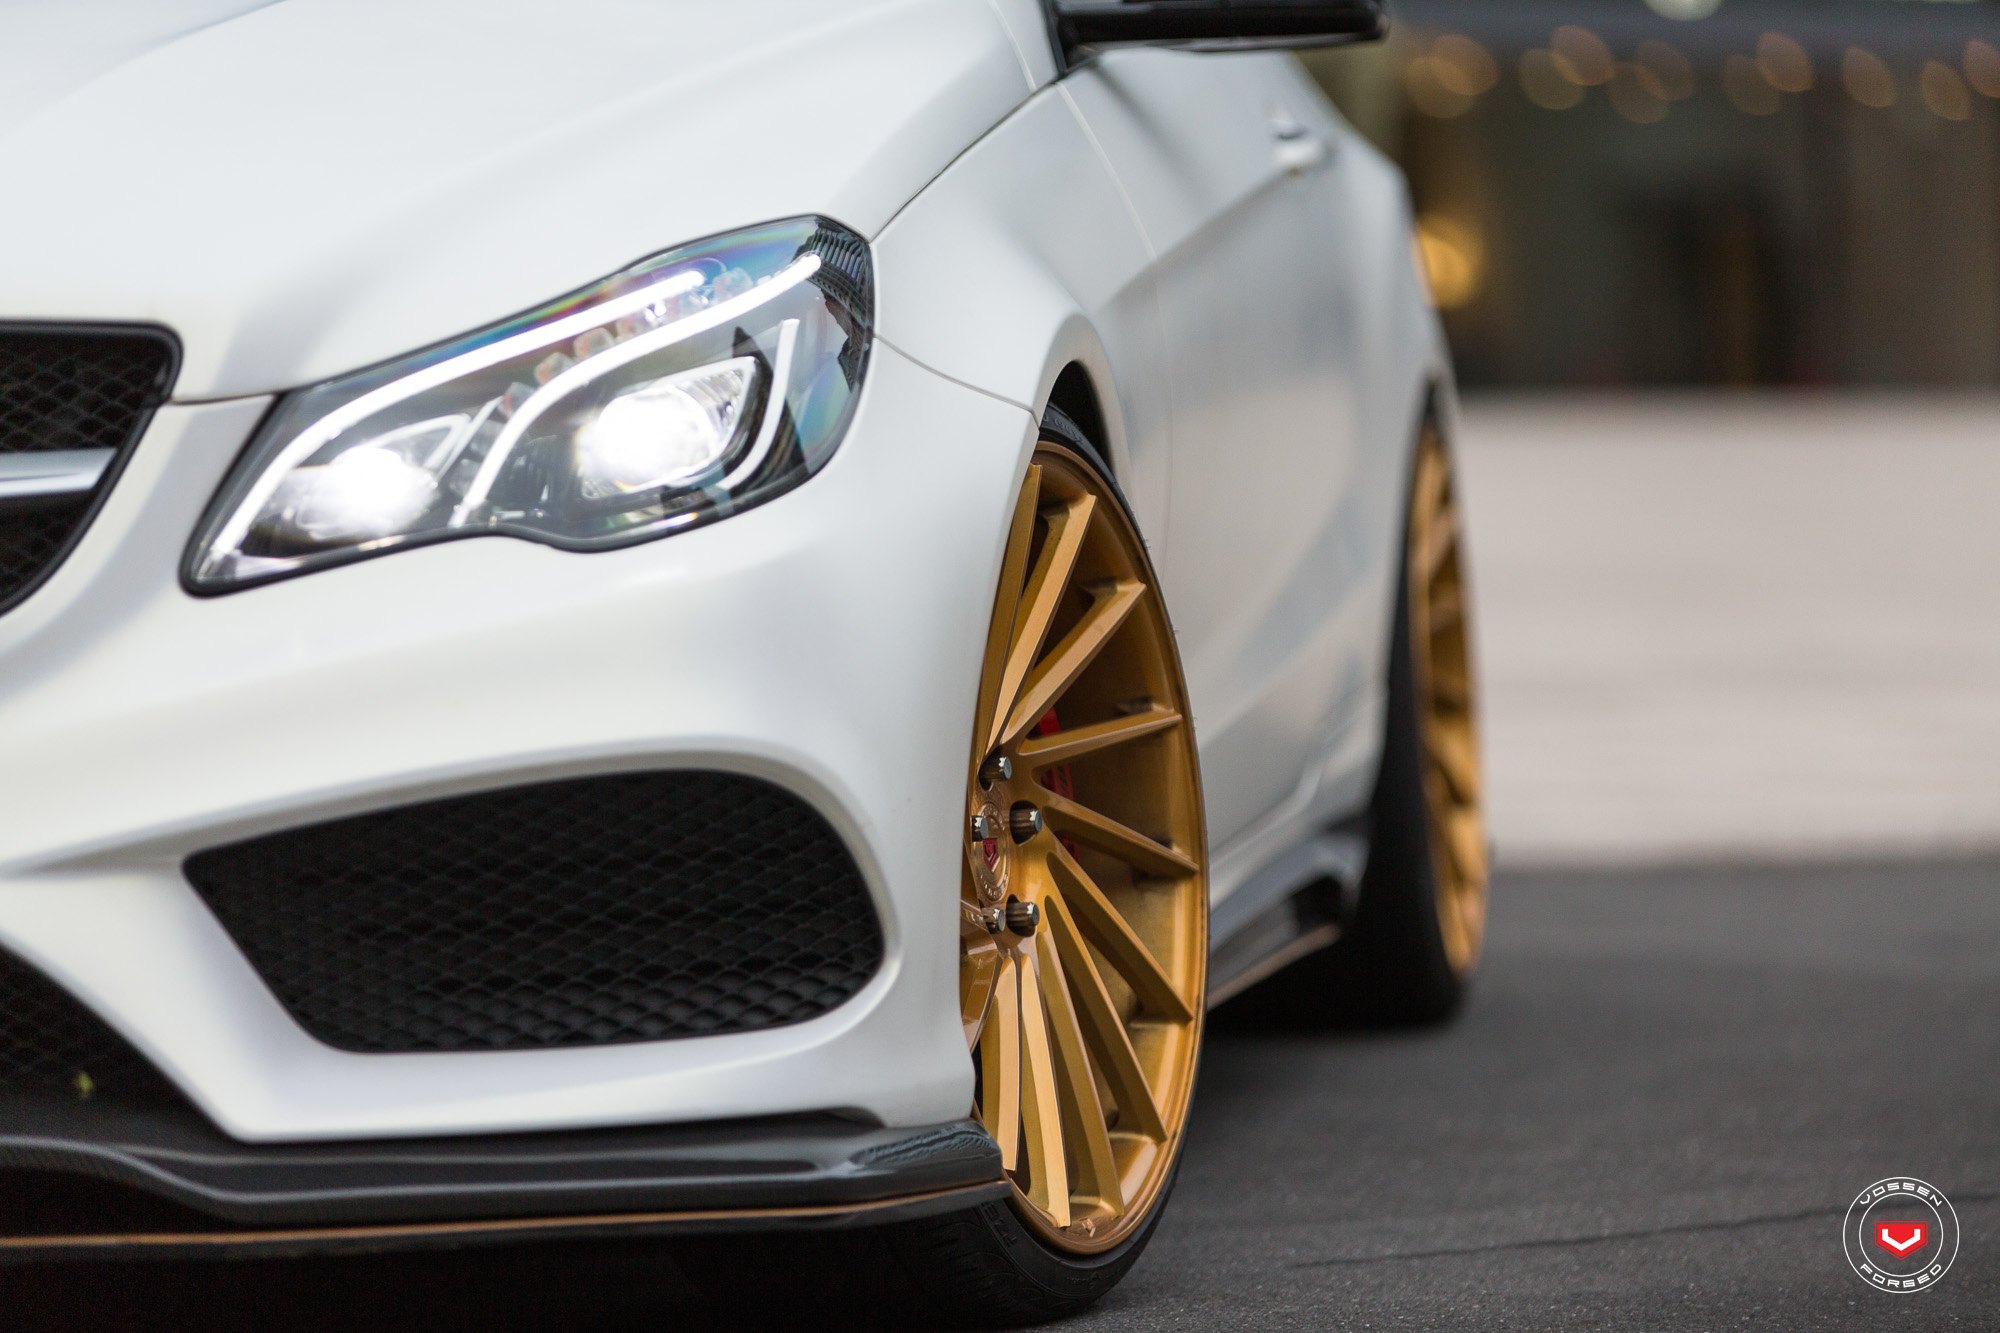 White Mercedes E-Class with Forged Vossen Wheels - Photo by Vossen